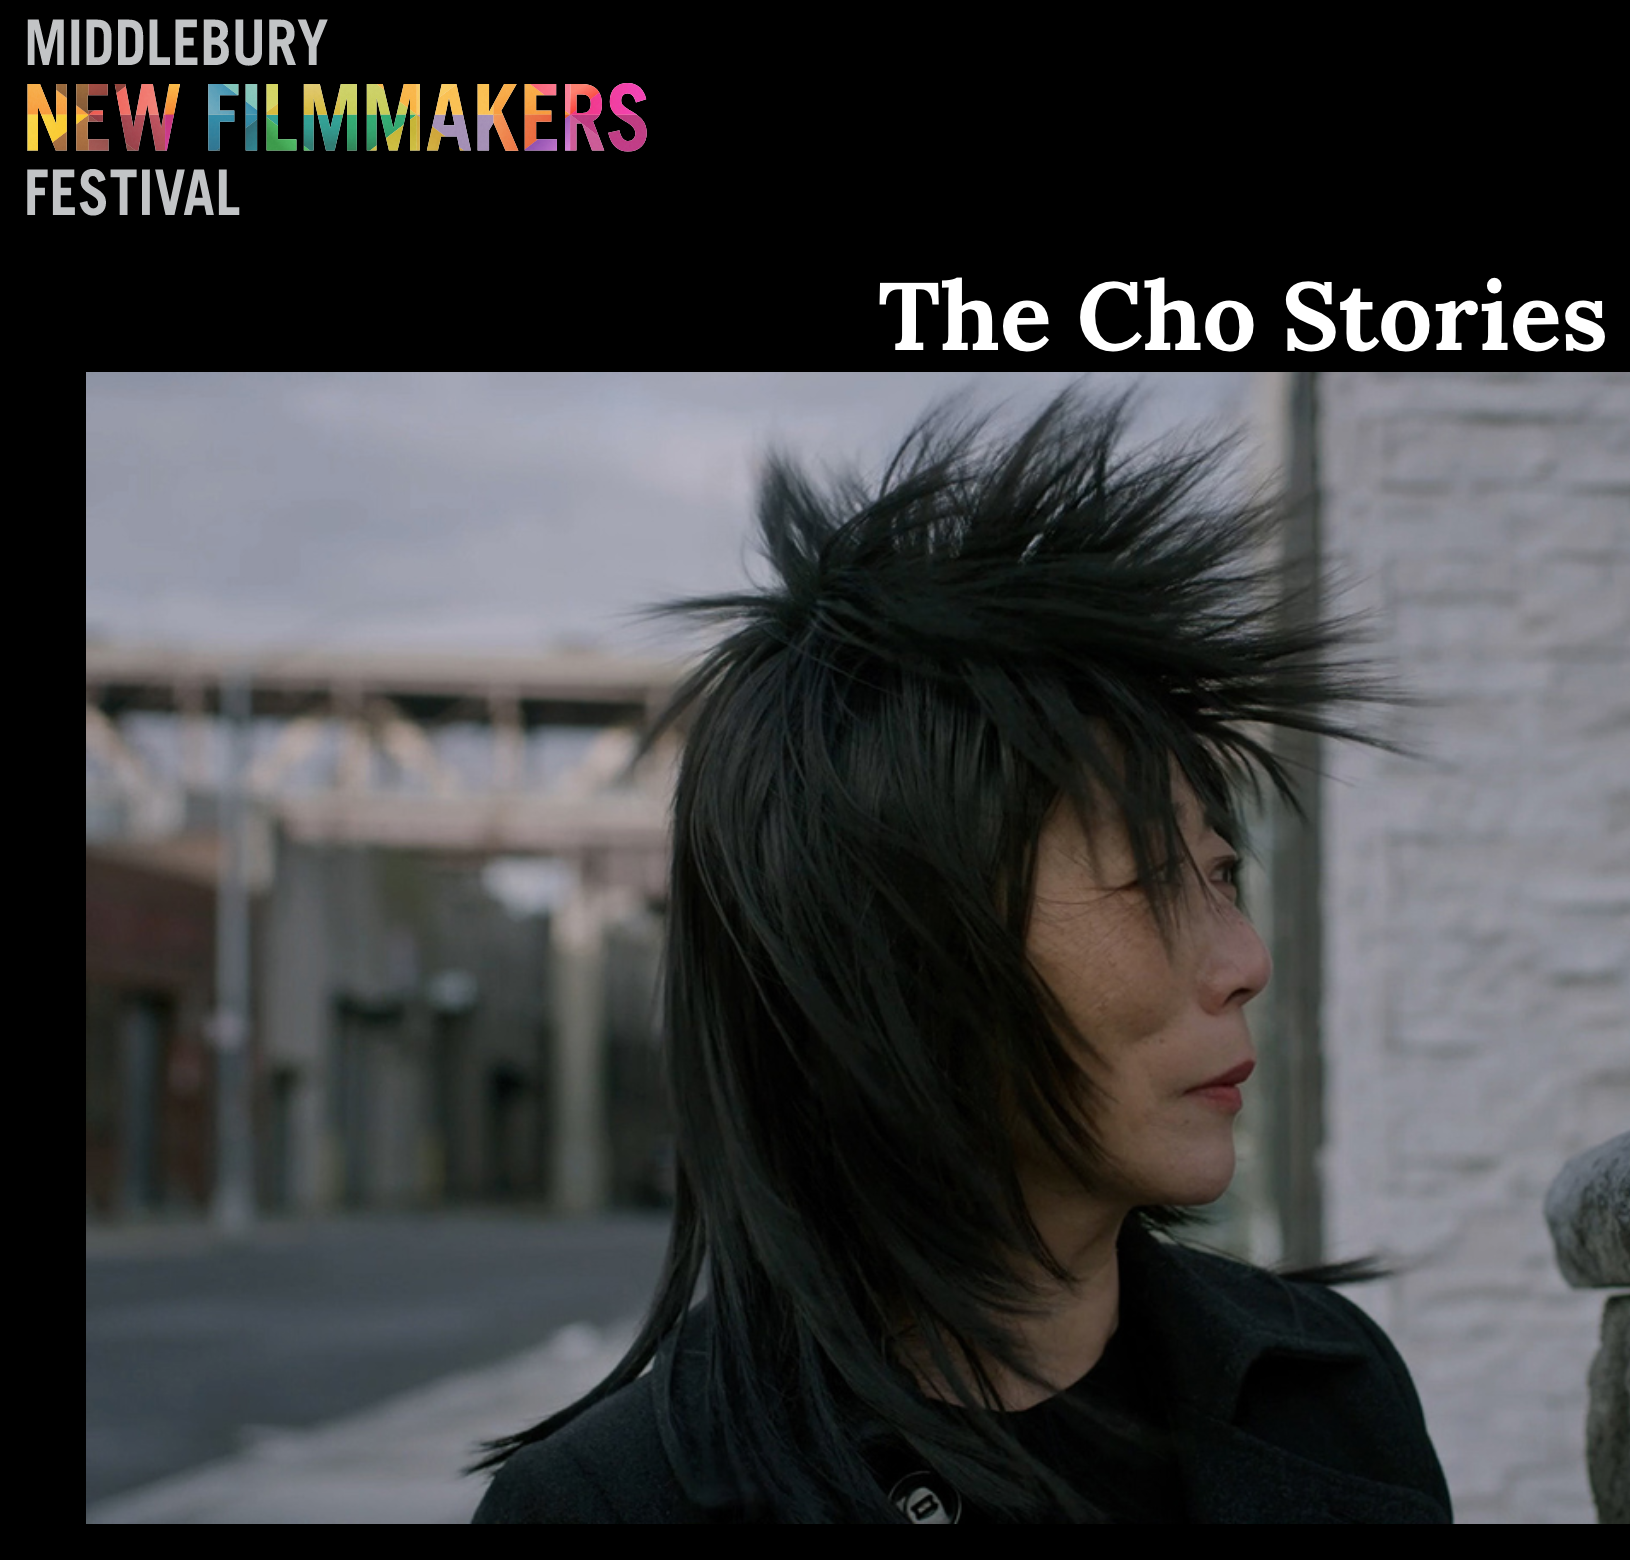 The Cho Stories wins Audience Award for Short Film at MNFF!